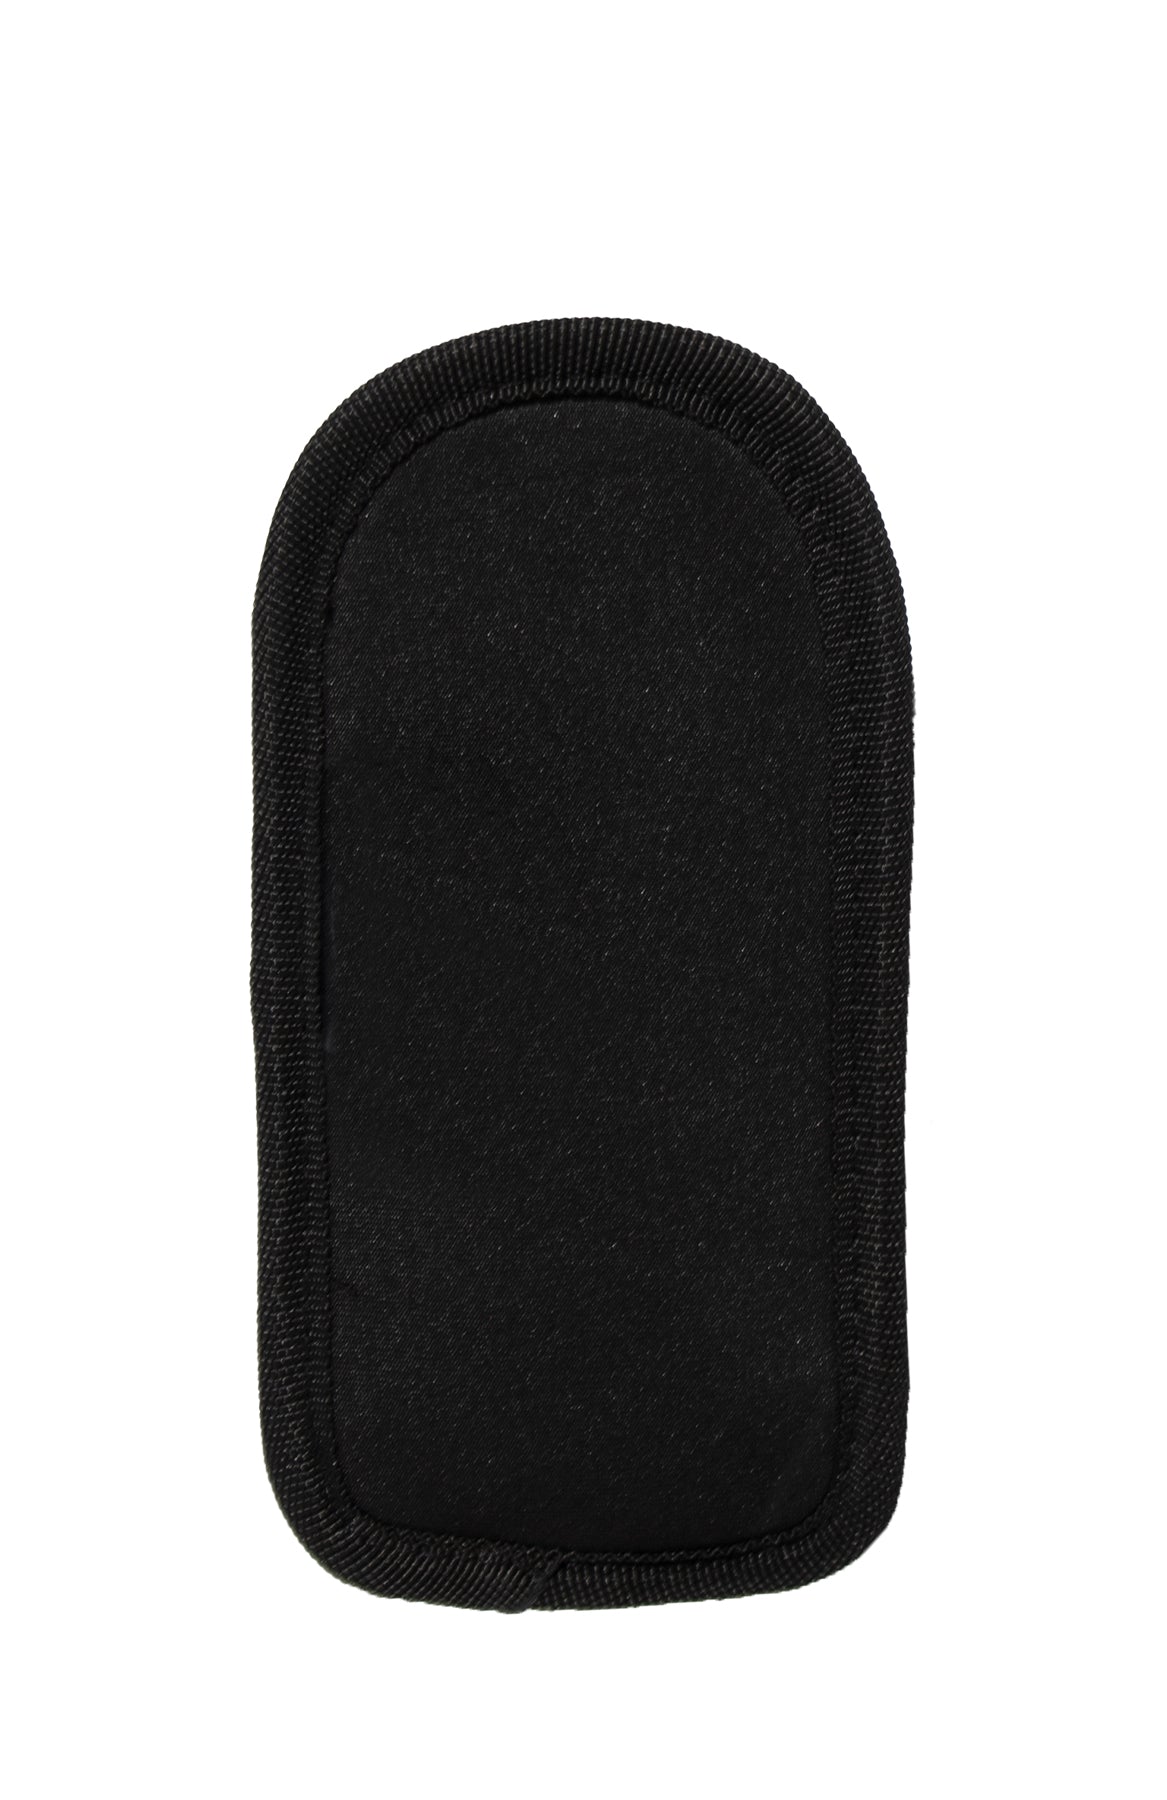 Concealed Inside Waistband Single Magazine Pouch